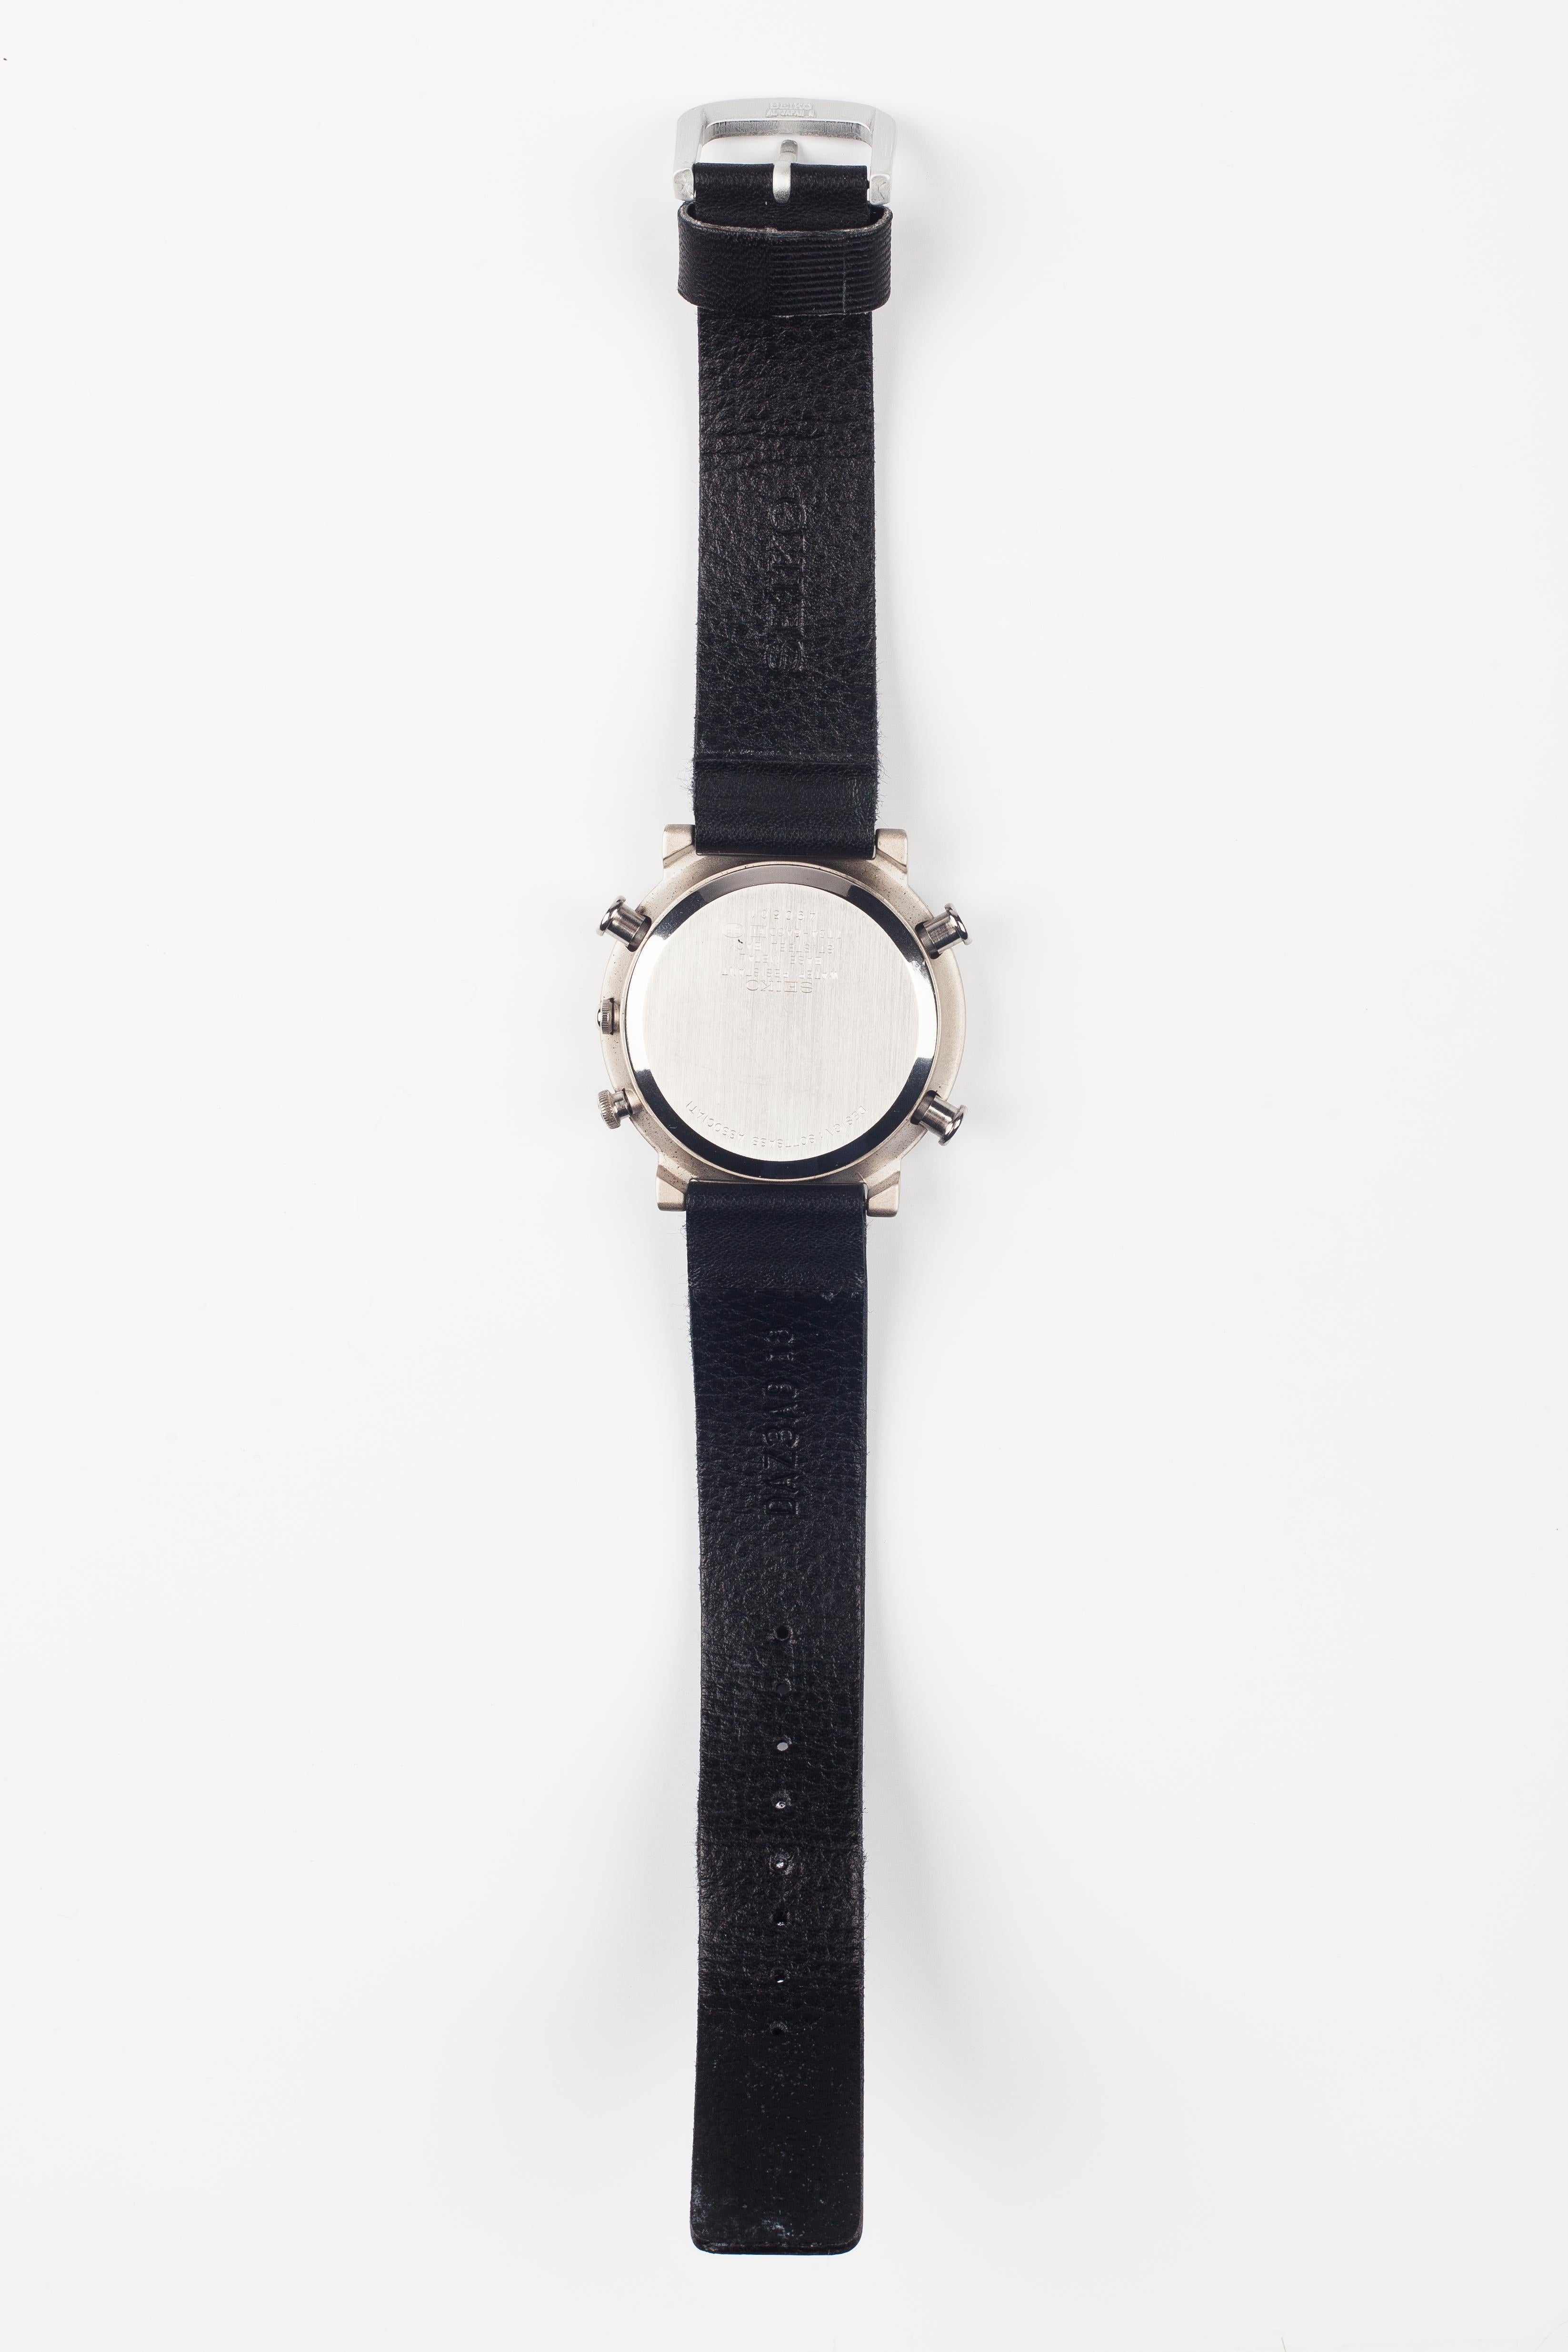 Stainless Steel Ettore Sottsass Collection Seiko Chronograph Wristwatch, 1st Ed., Japan, 1993